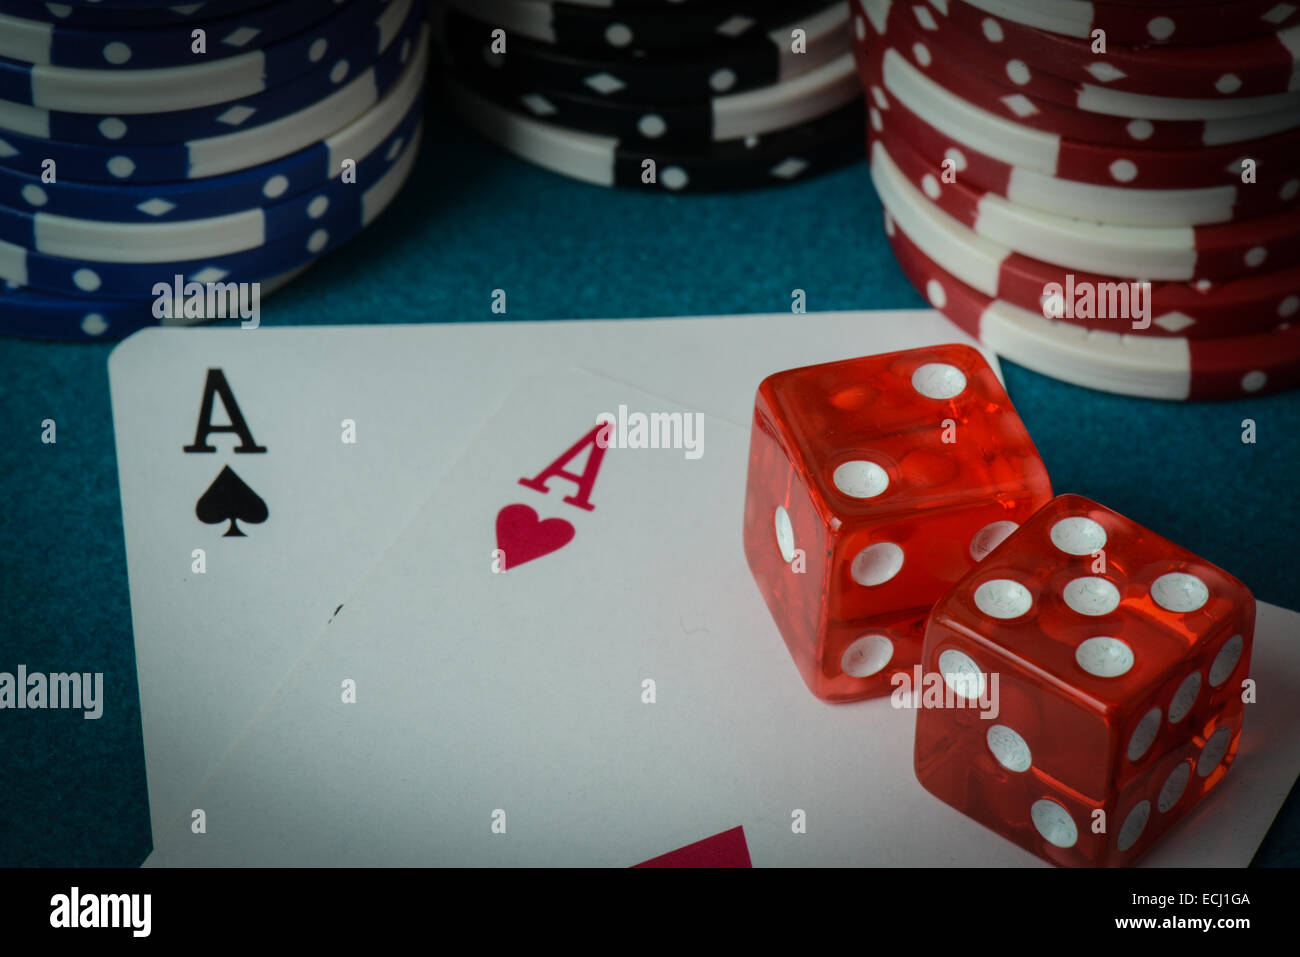 Playing Cards and Dice used with Gambling Chips Stock Photo